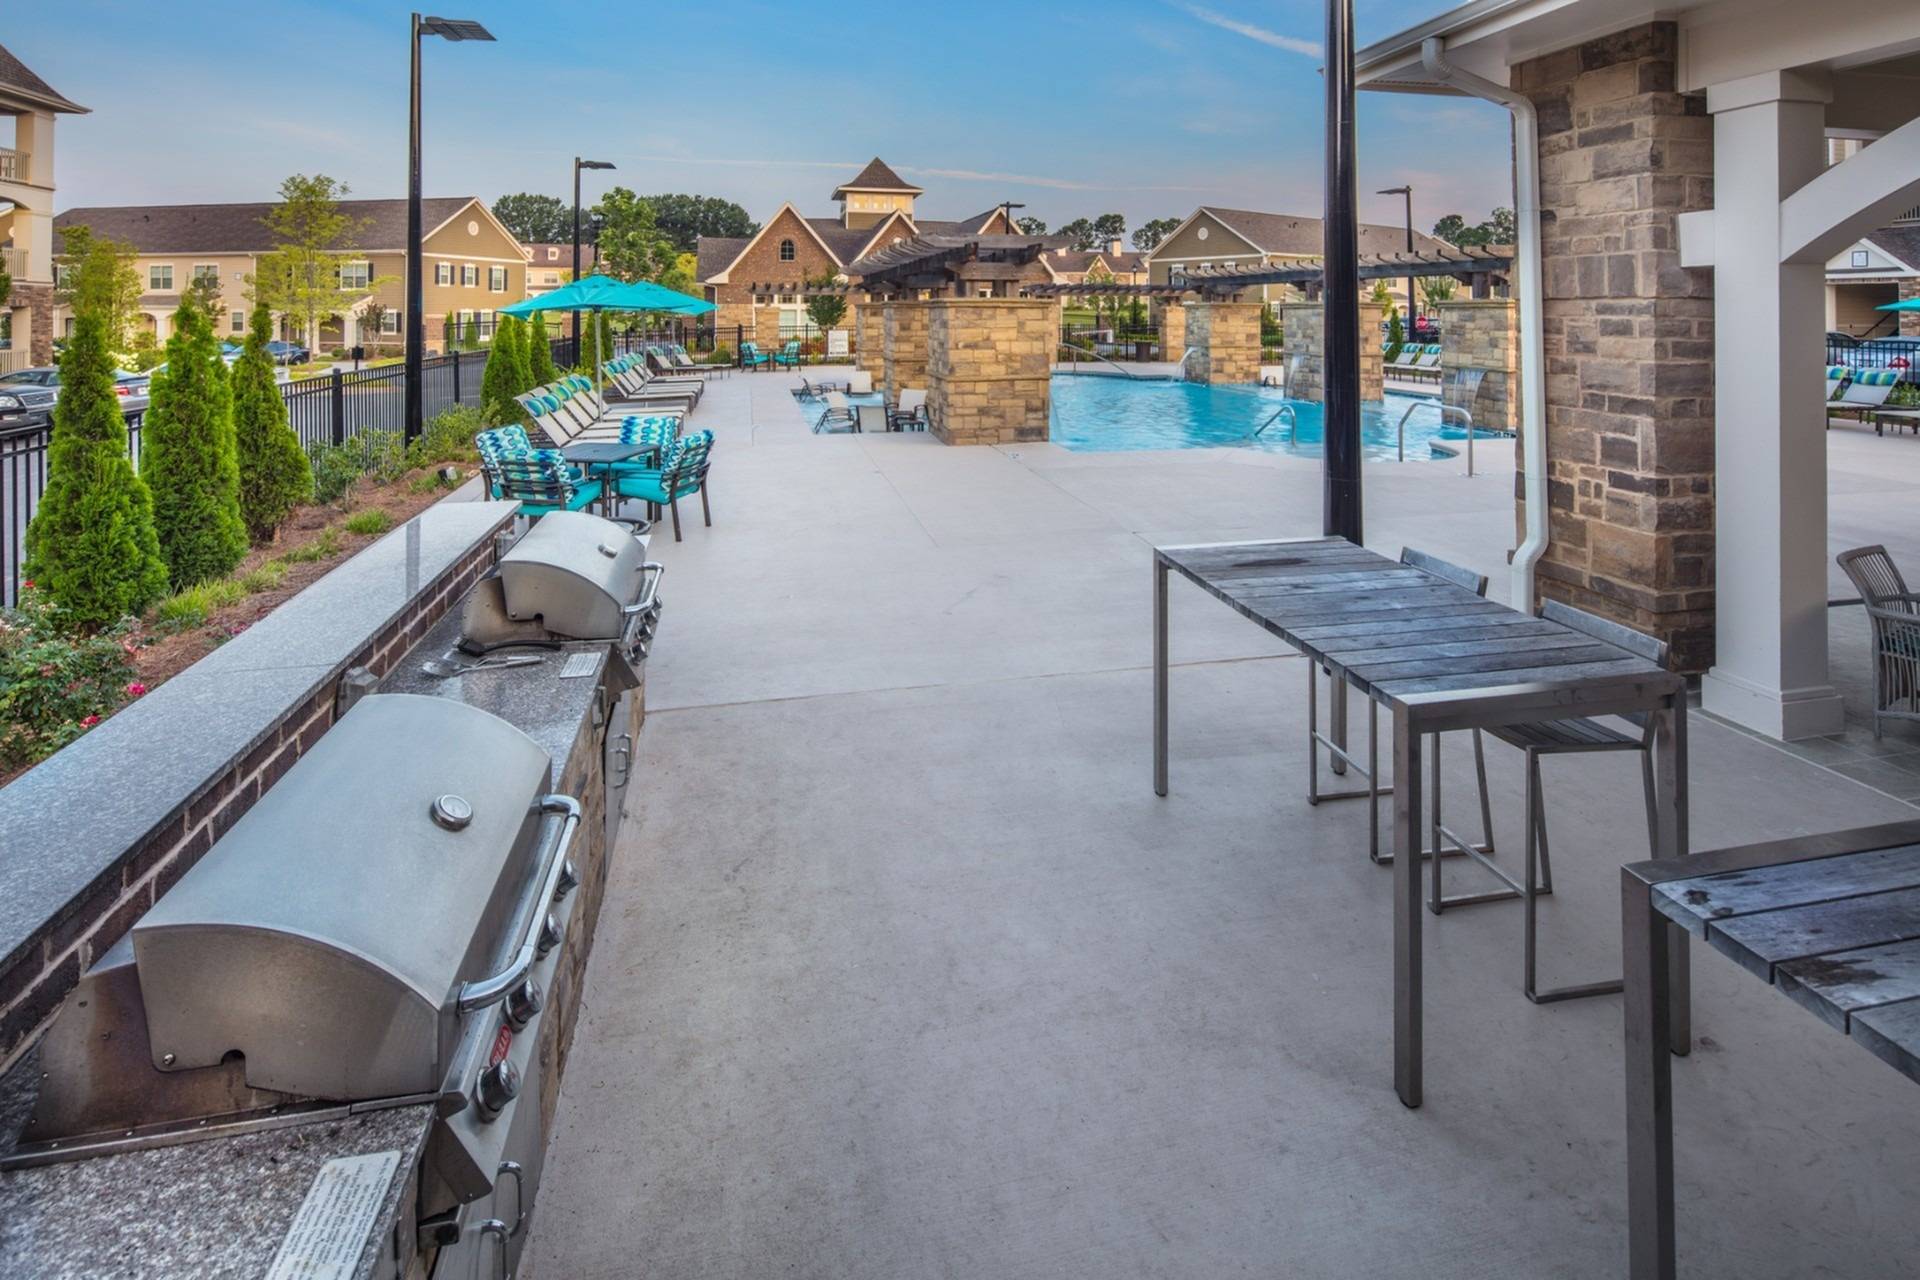 Grilling Area on Patio | Apartments in Tucker, GA | Green Park